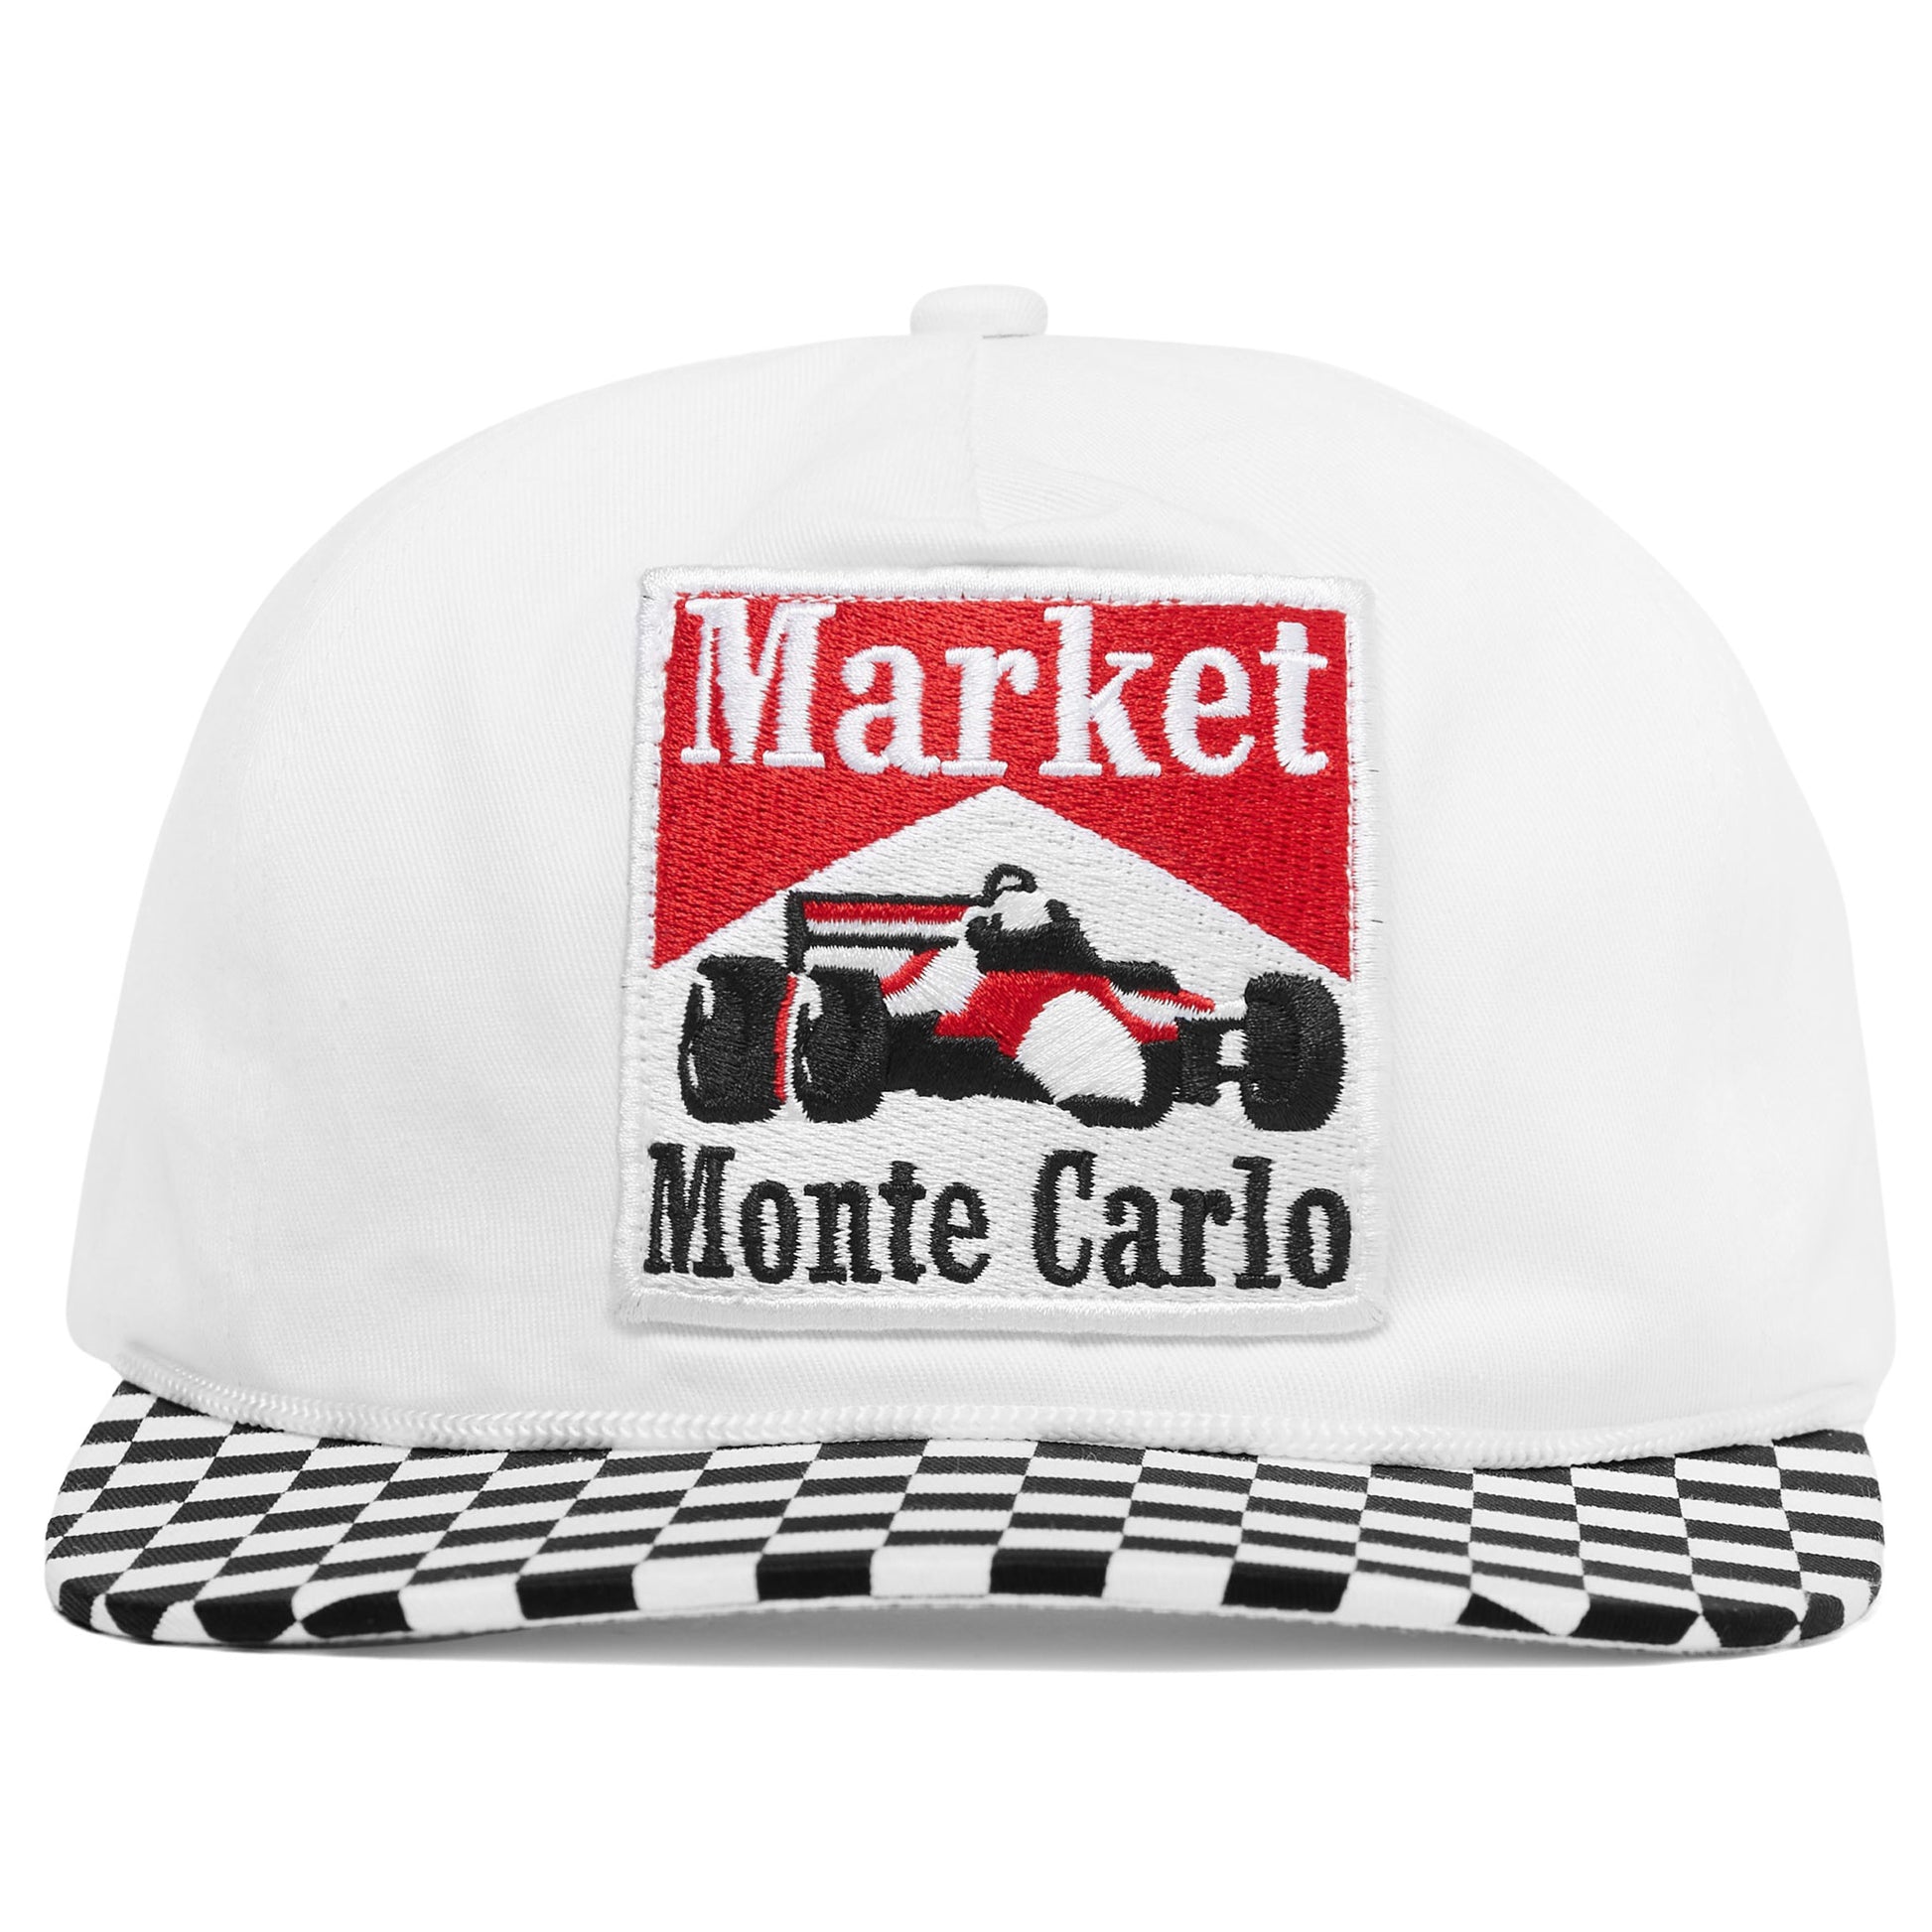 MARKET clothing brand MARKET RACING CHECKERED HAT. Find more graphic tees, hats, beanies, hoodies at MarketStudios.com. Formally Chinatown Market. 